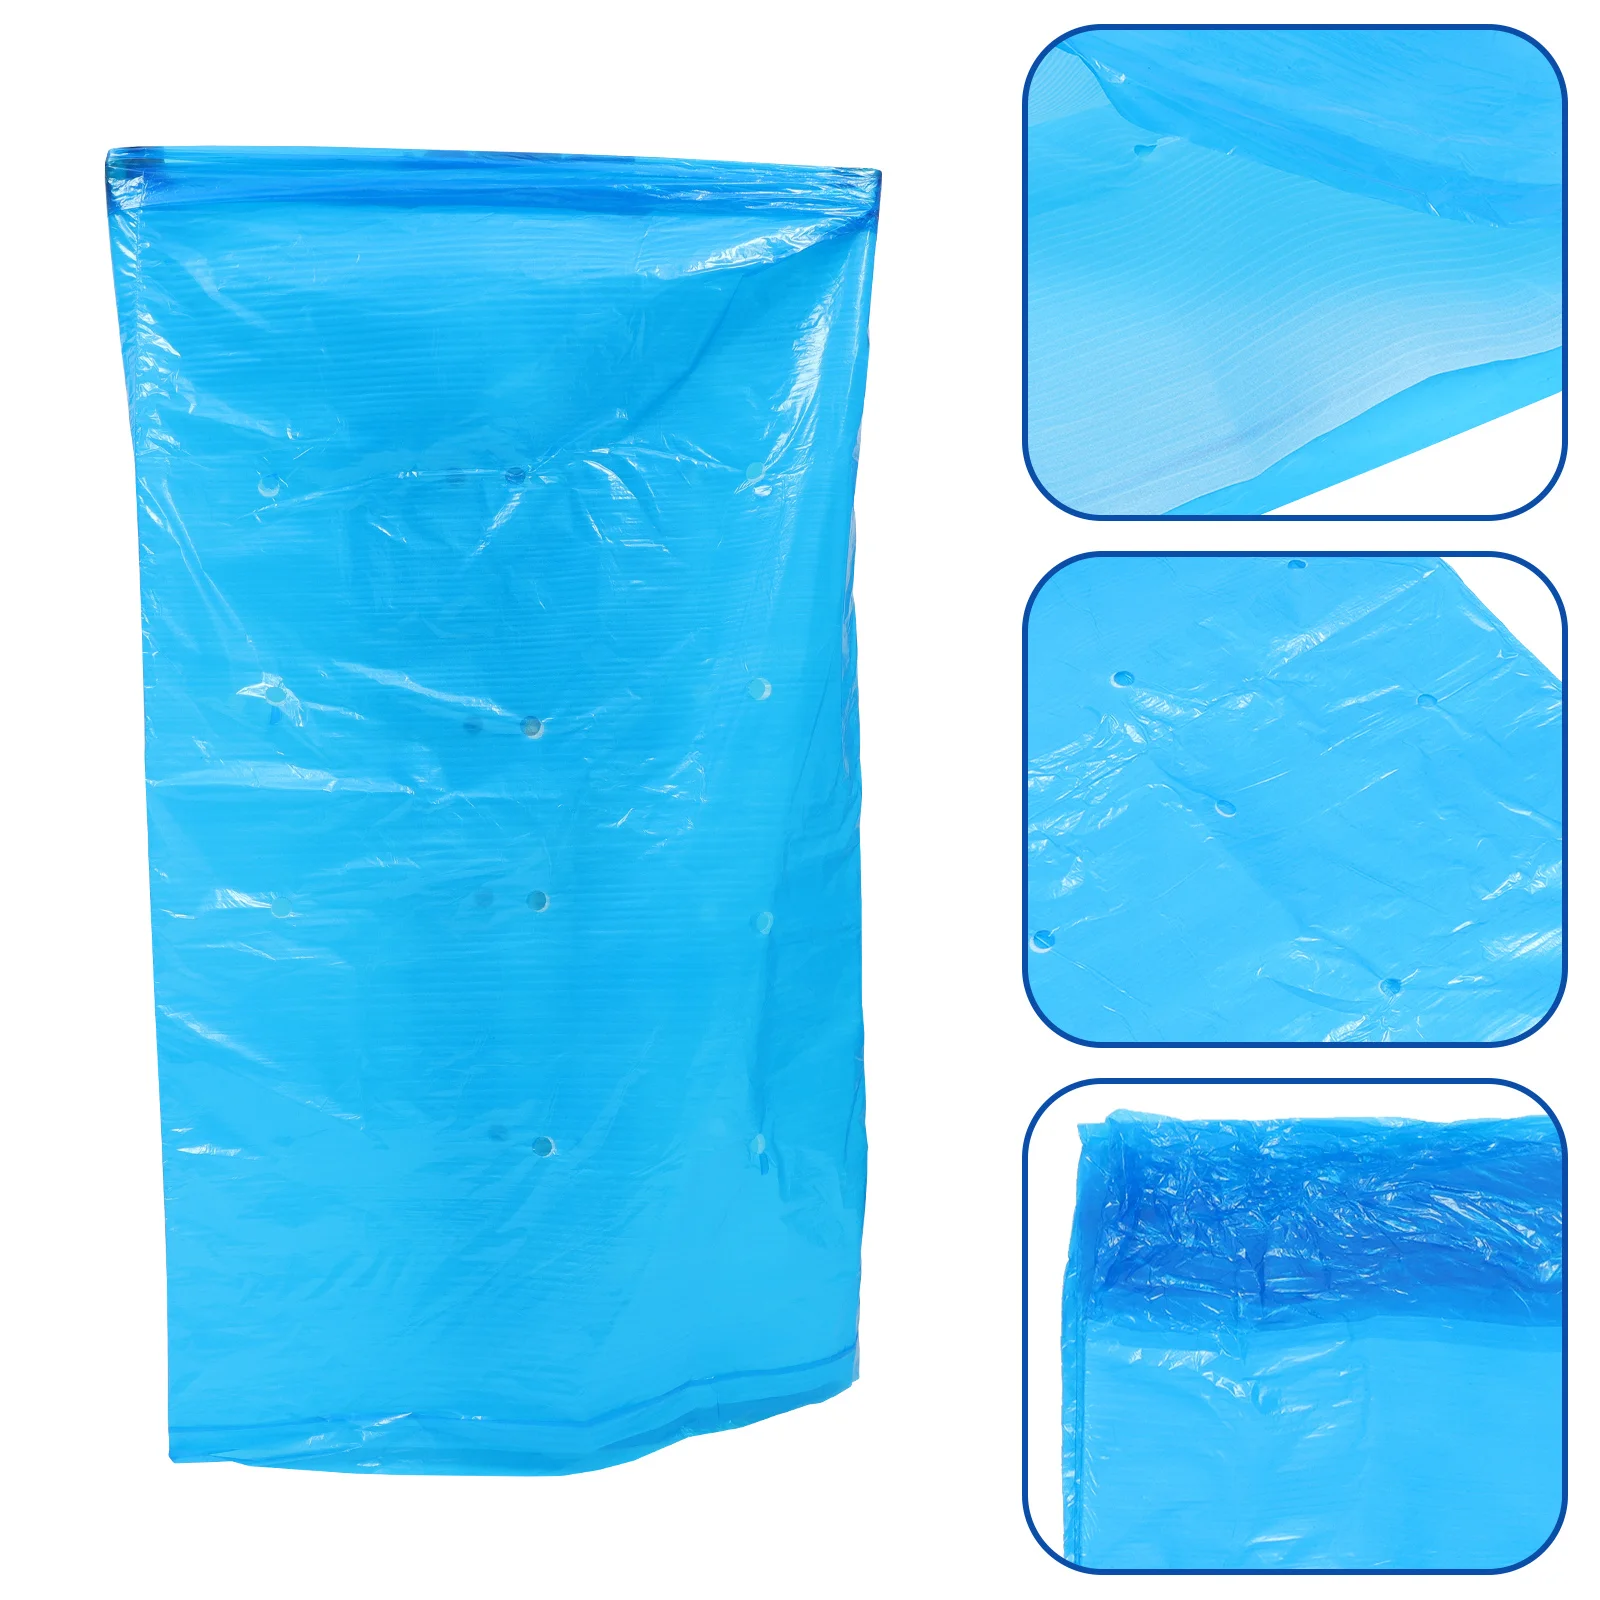 

Banana Grow Bag Protection Cover Orchard Covers Protective Bags Winter Rainproof Sun Fruit Garden Insect-proof